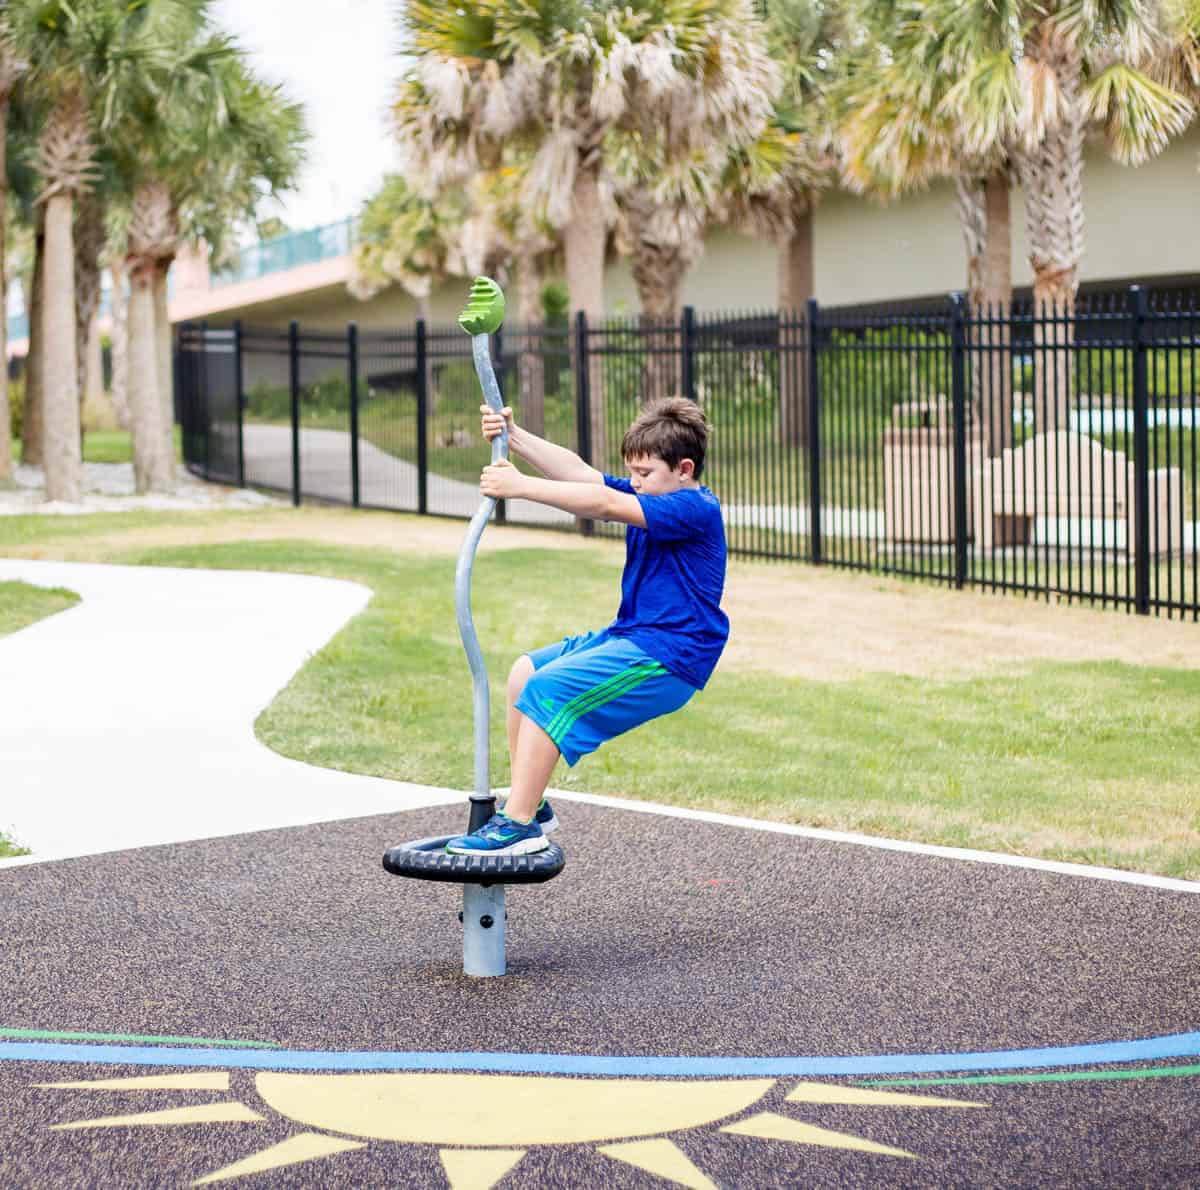 DAILY MOM PARENTS PORTAL WHY KIDS NEED RECESS